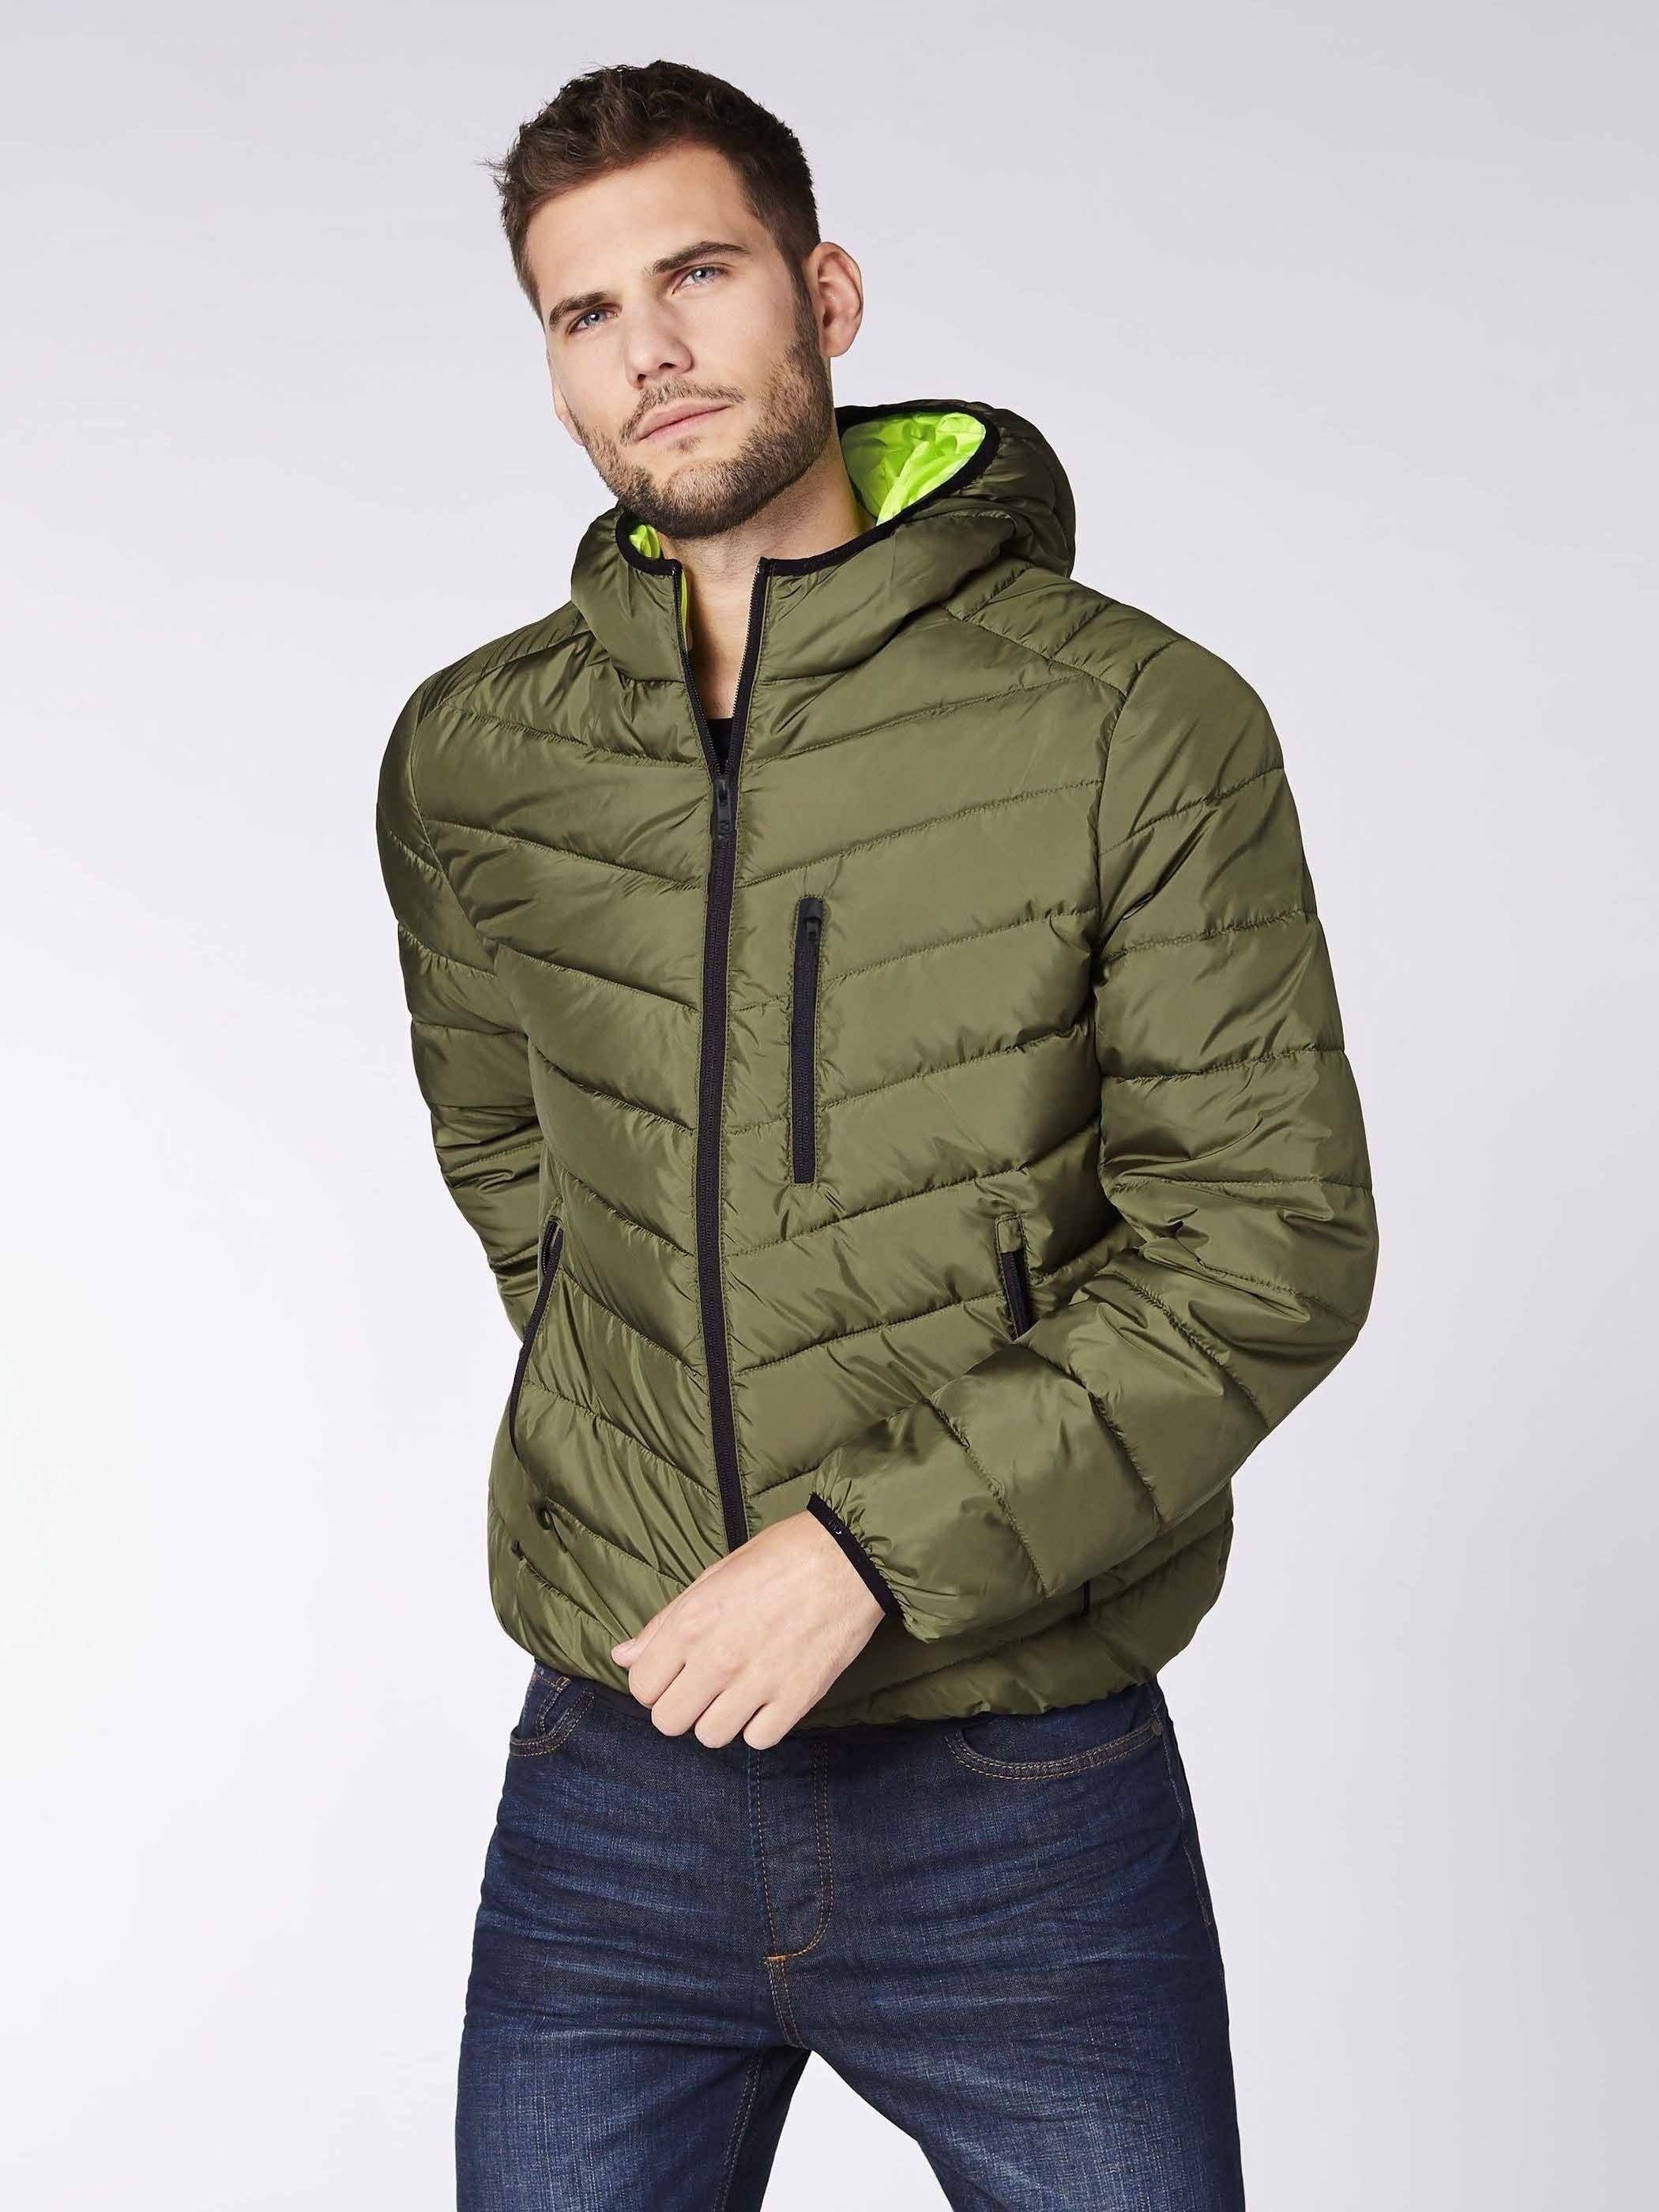 Men's Plus Size Solid Chevron Hooded Puffer Coat, Puffer Jacket, Down Jacket for Winter, Oversized Thick, Bright Neon Green Lining Warm Outwear